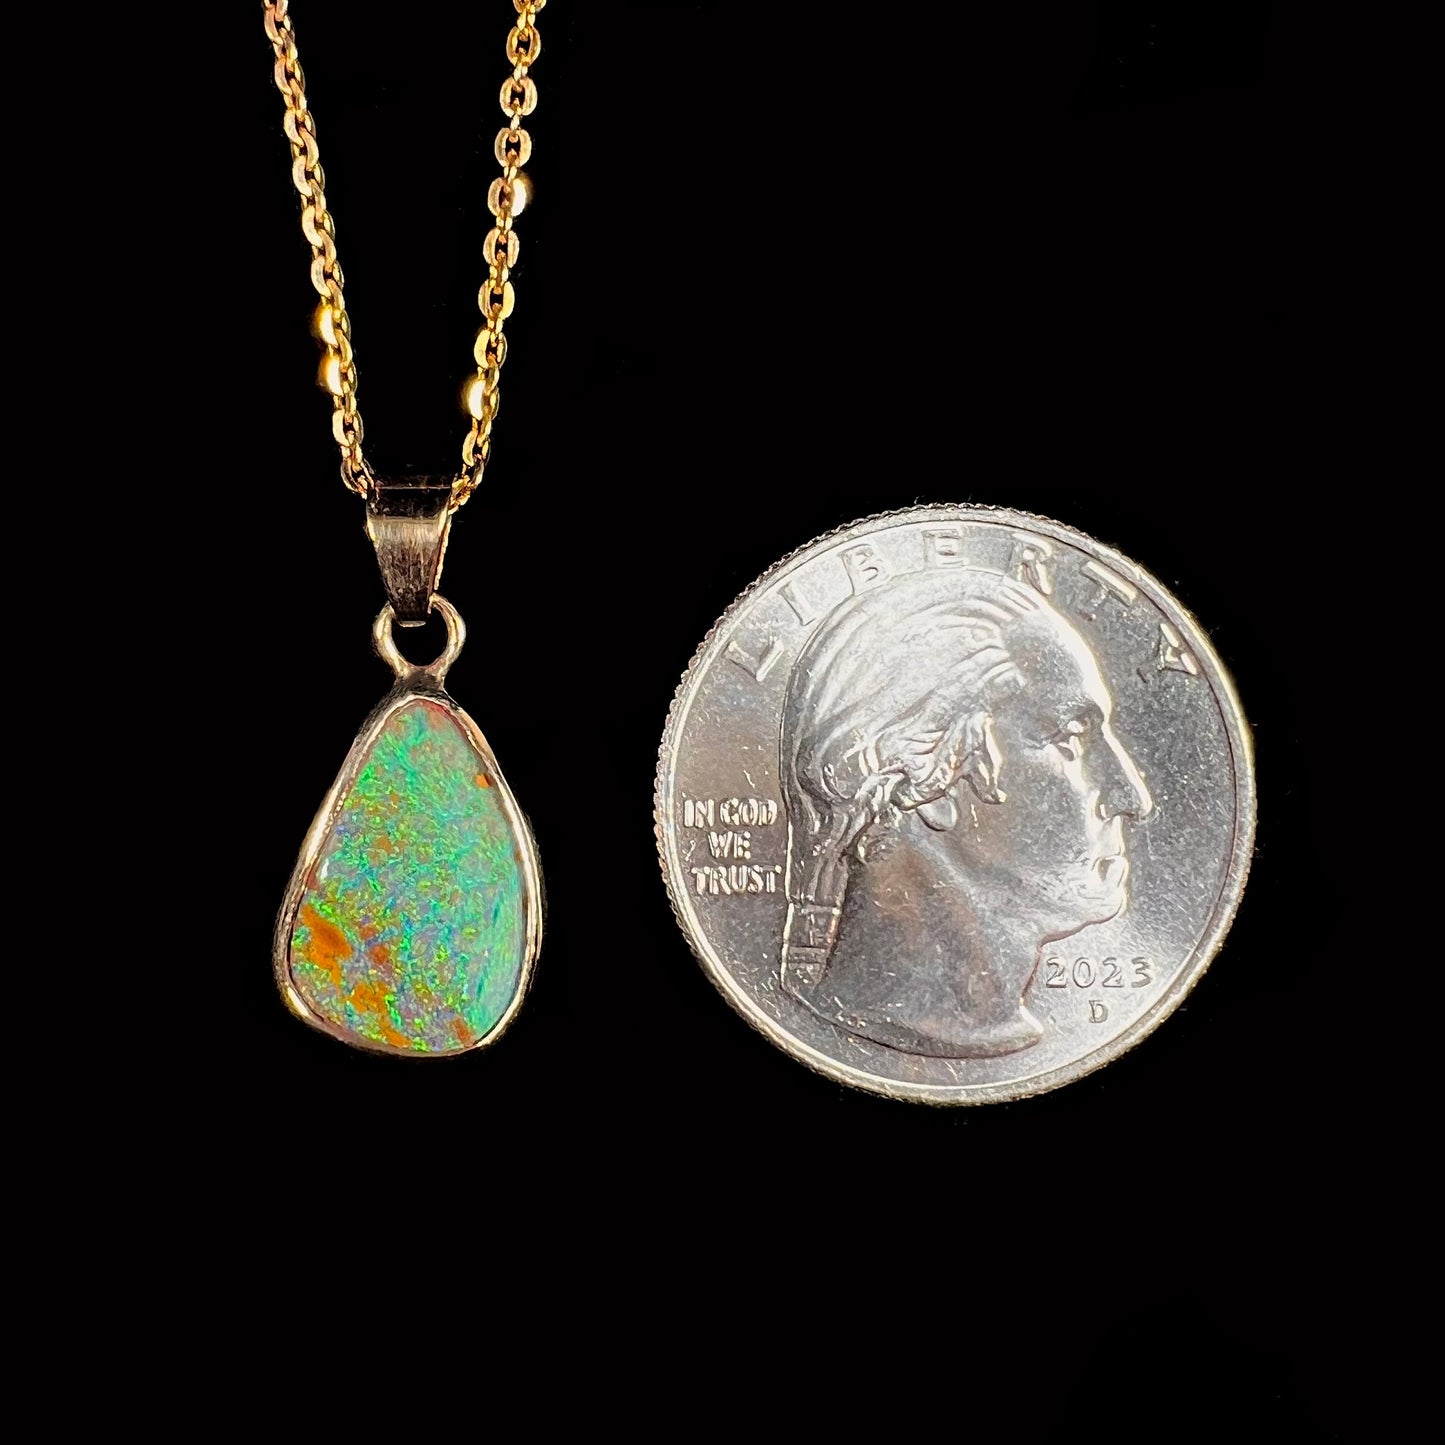 A ladies' natural boulder opal necklace set in 14k yellow gold.  The opal is bezel set and shows green and blue colors.